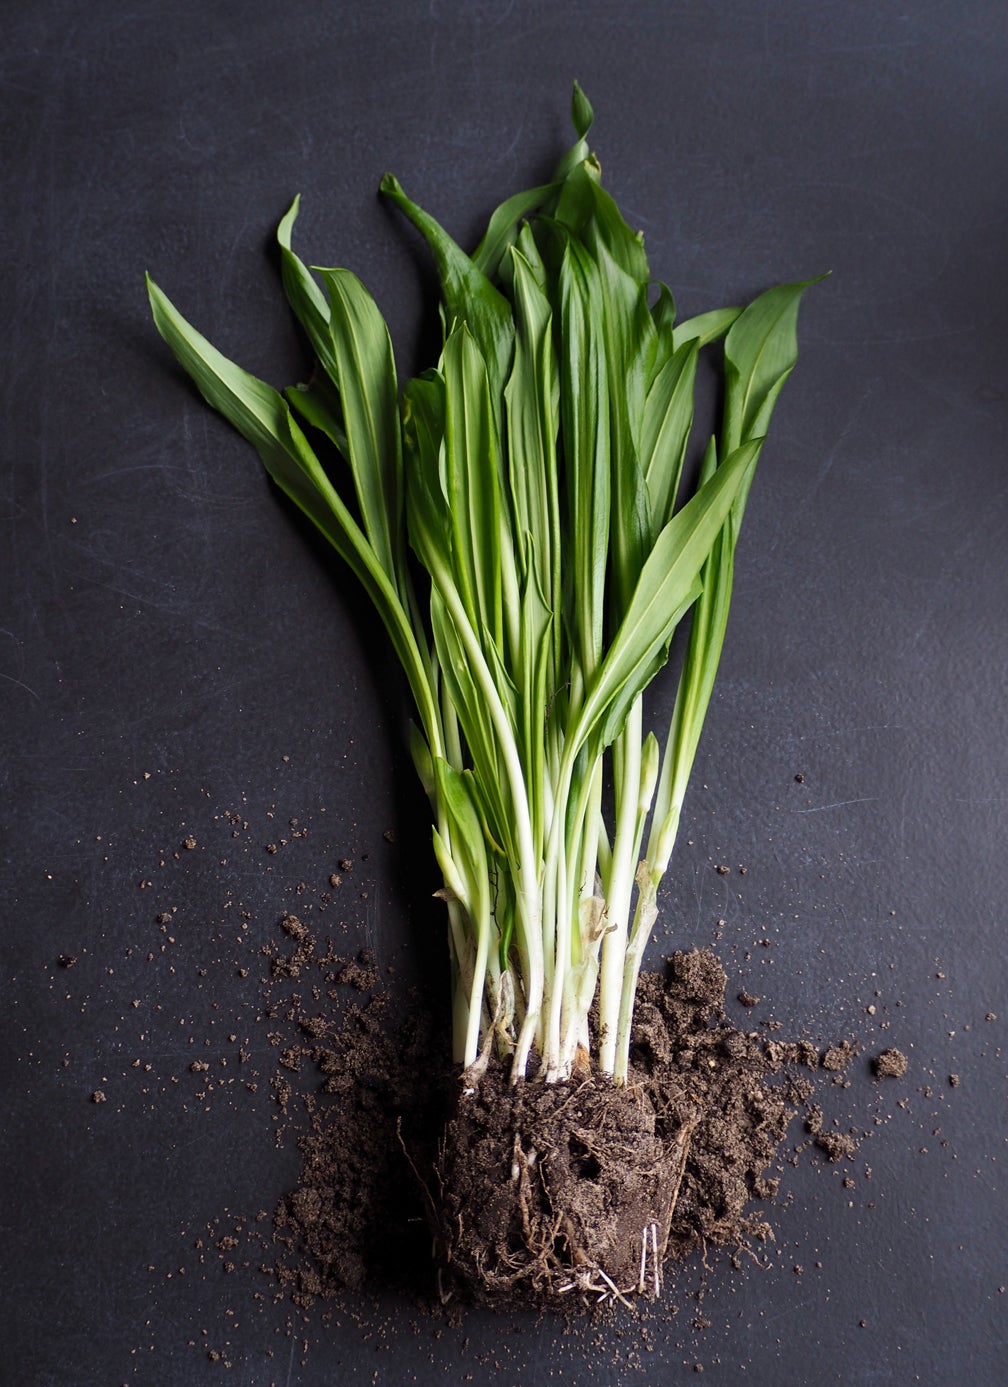 Ramps, or wild leeks, give food that homey, yet gourmet touch